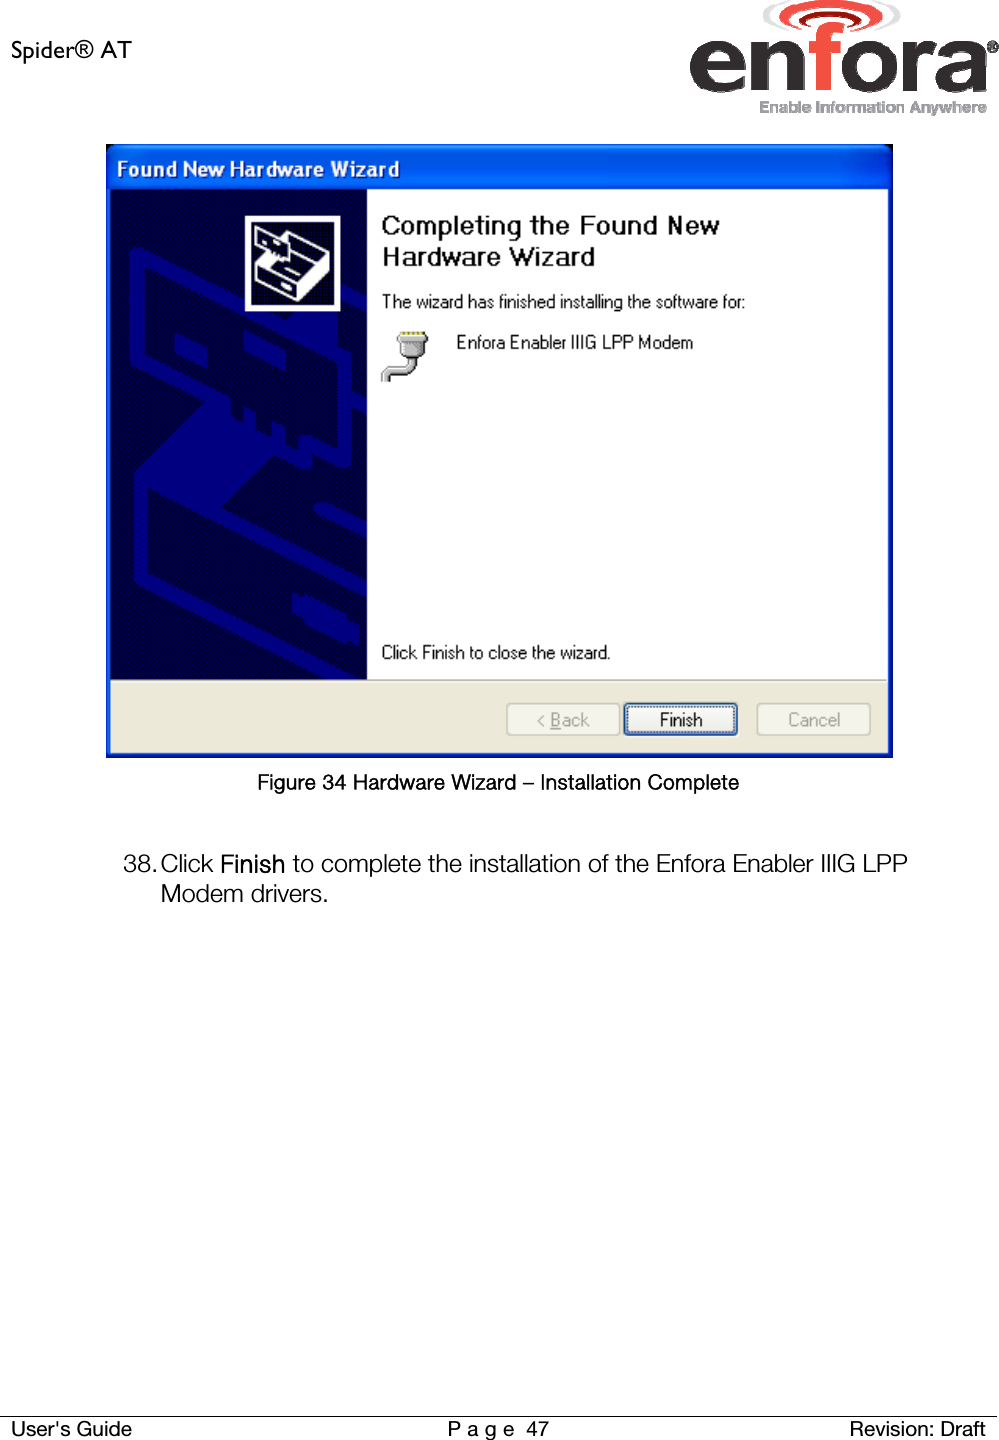 Spider® AT     User&apos;s Guide  P a g e 47 Revision: Draft  Figure 34 Hardware Wizard – Installation Complete  38. Click Finish to complete the installation of the Enfora Enabler IIIG LPP Modem drivers.     